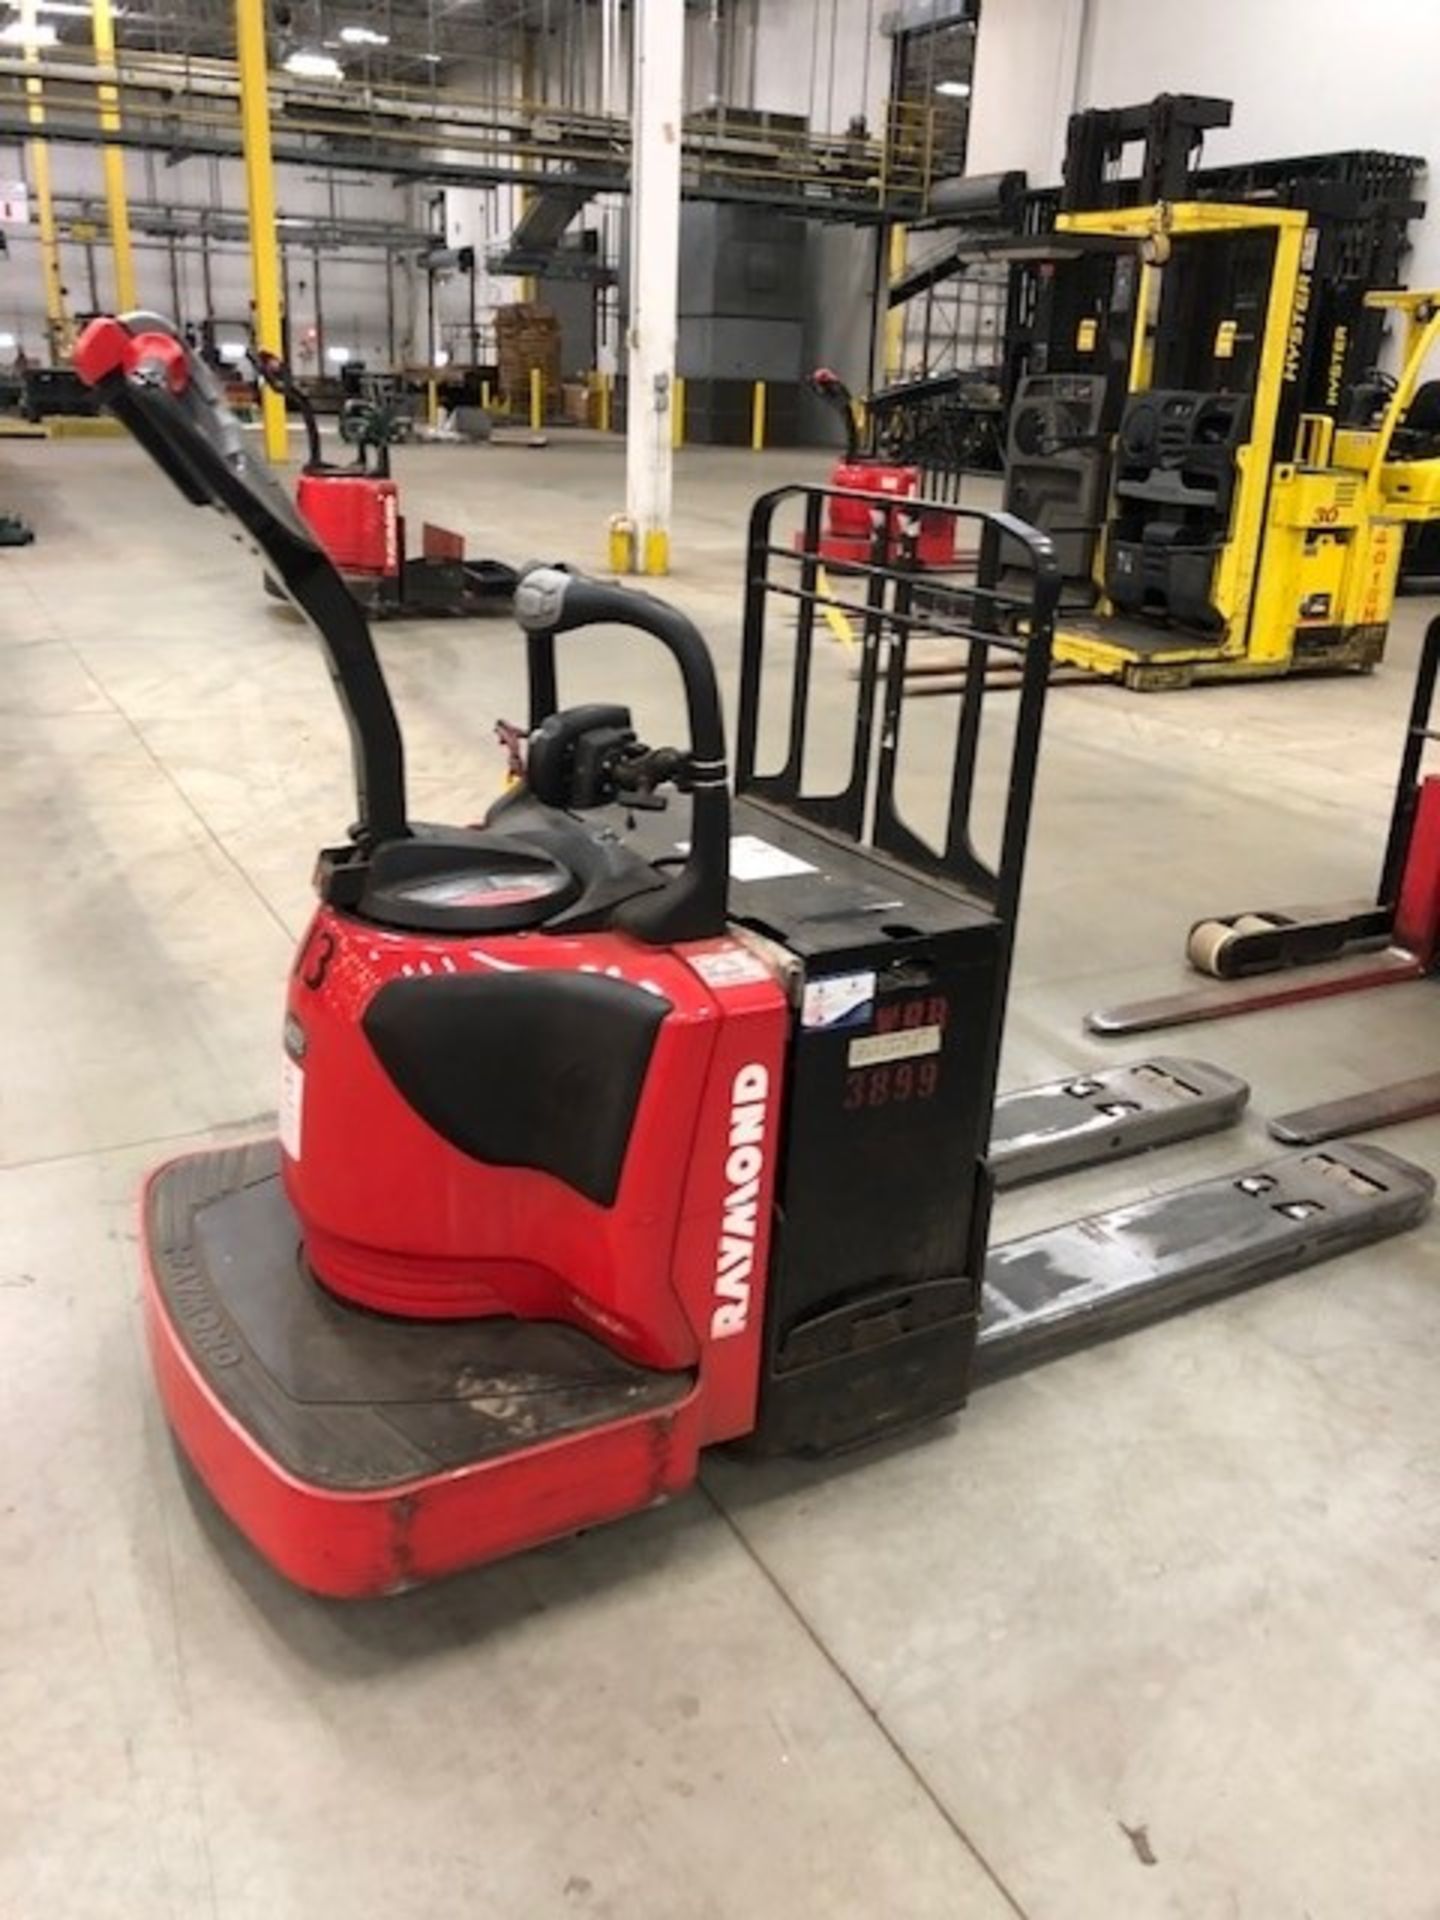 2013 RAYMOND 6,000 LB. CAPACITY ELECTRIC PALLET TRUCK; MODEL 8410, S/N 841-13-17109, WITH IWAREHOUSE - Image 4 of 8